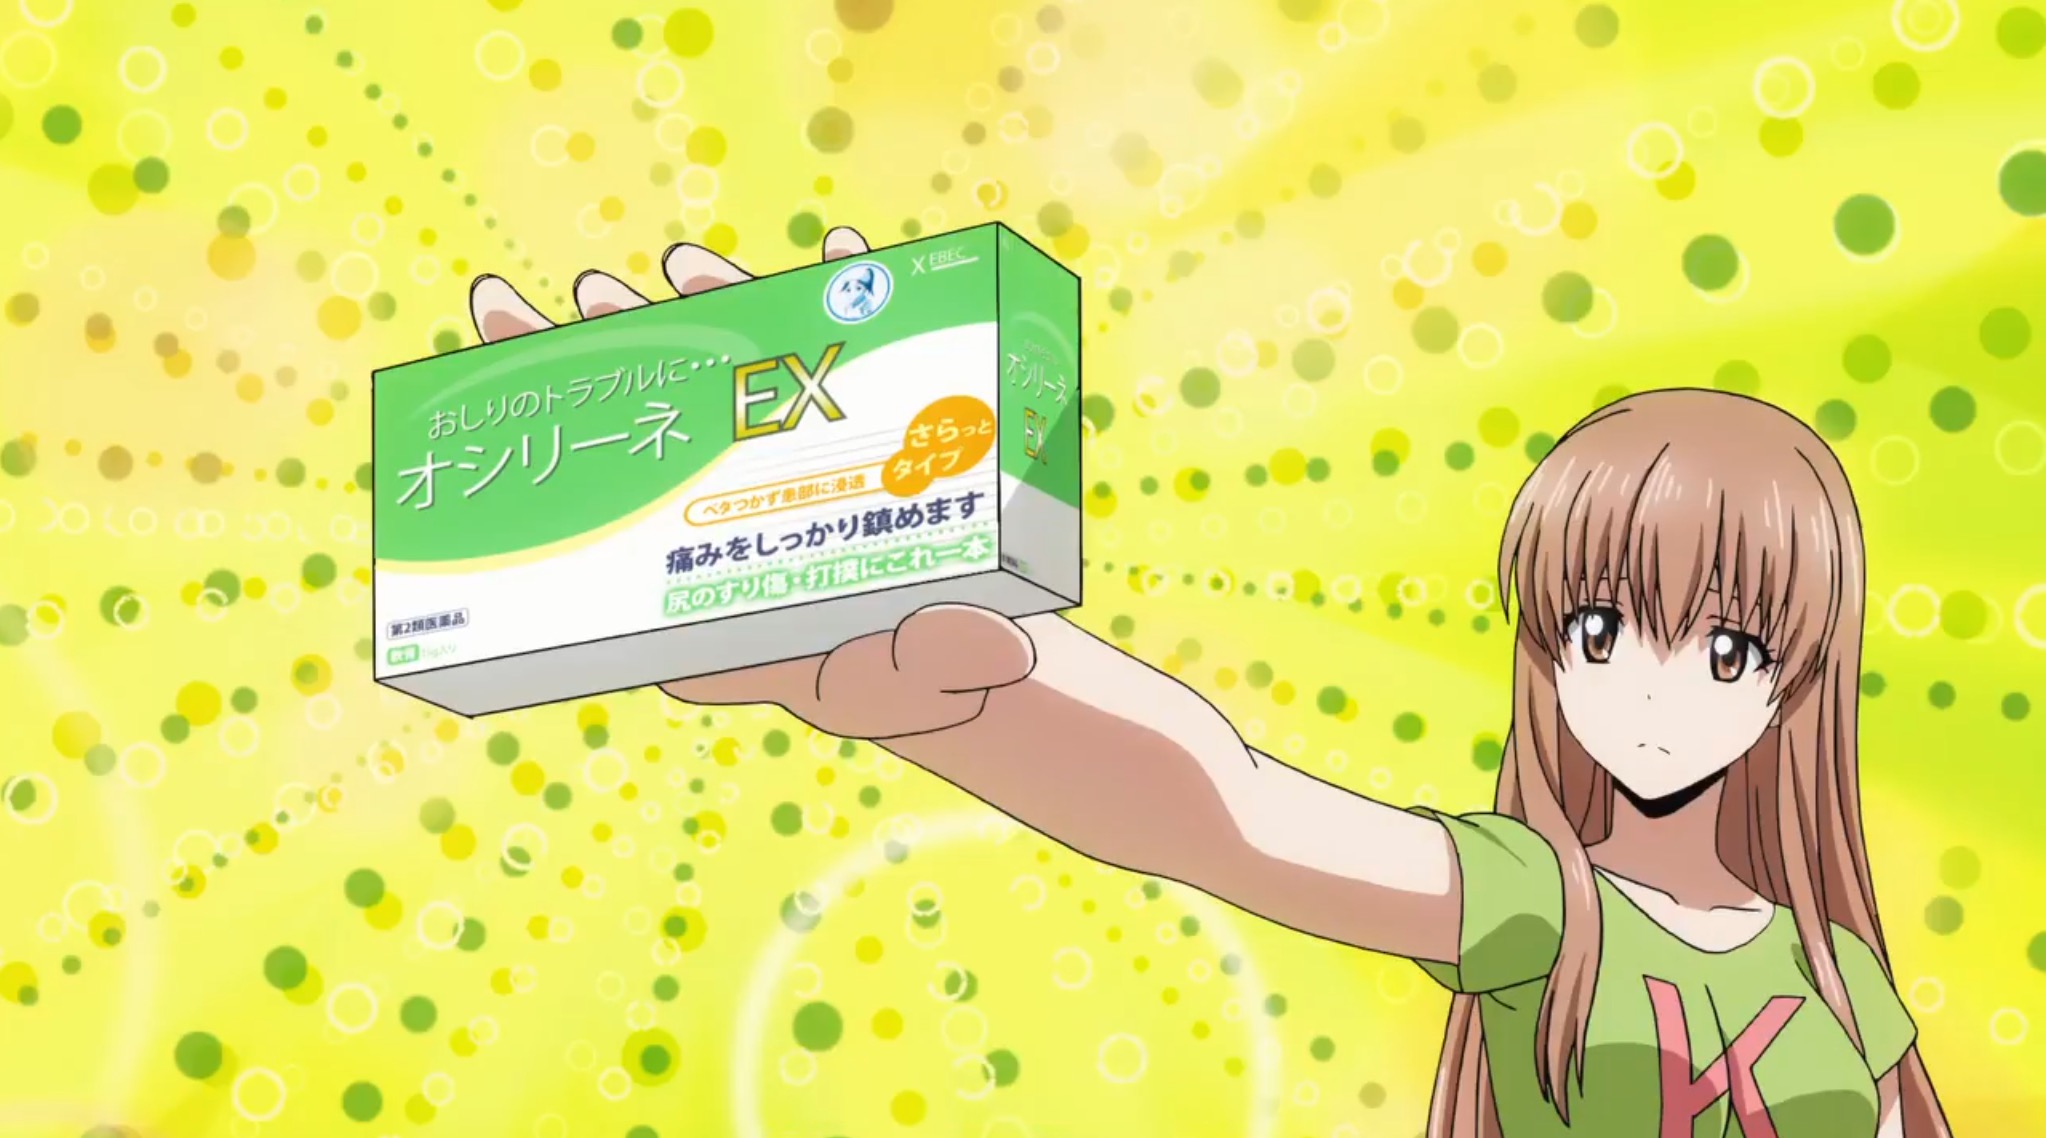 Anime suppository